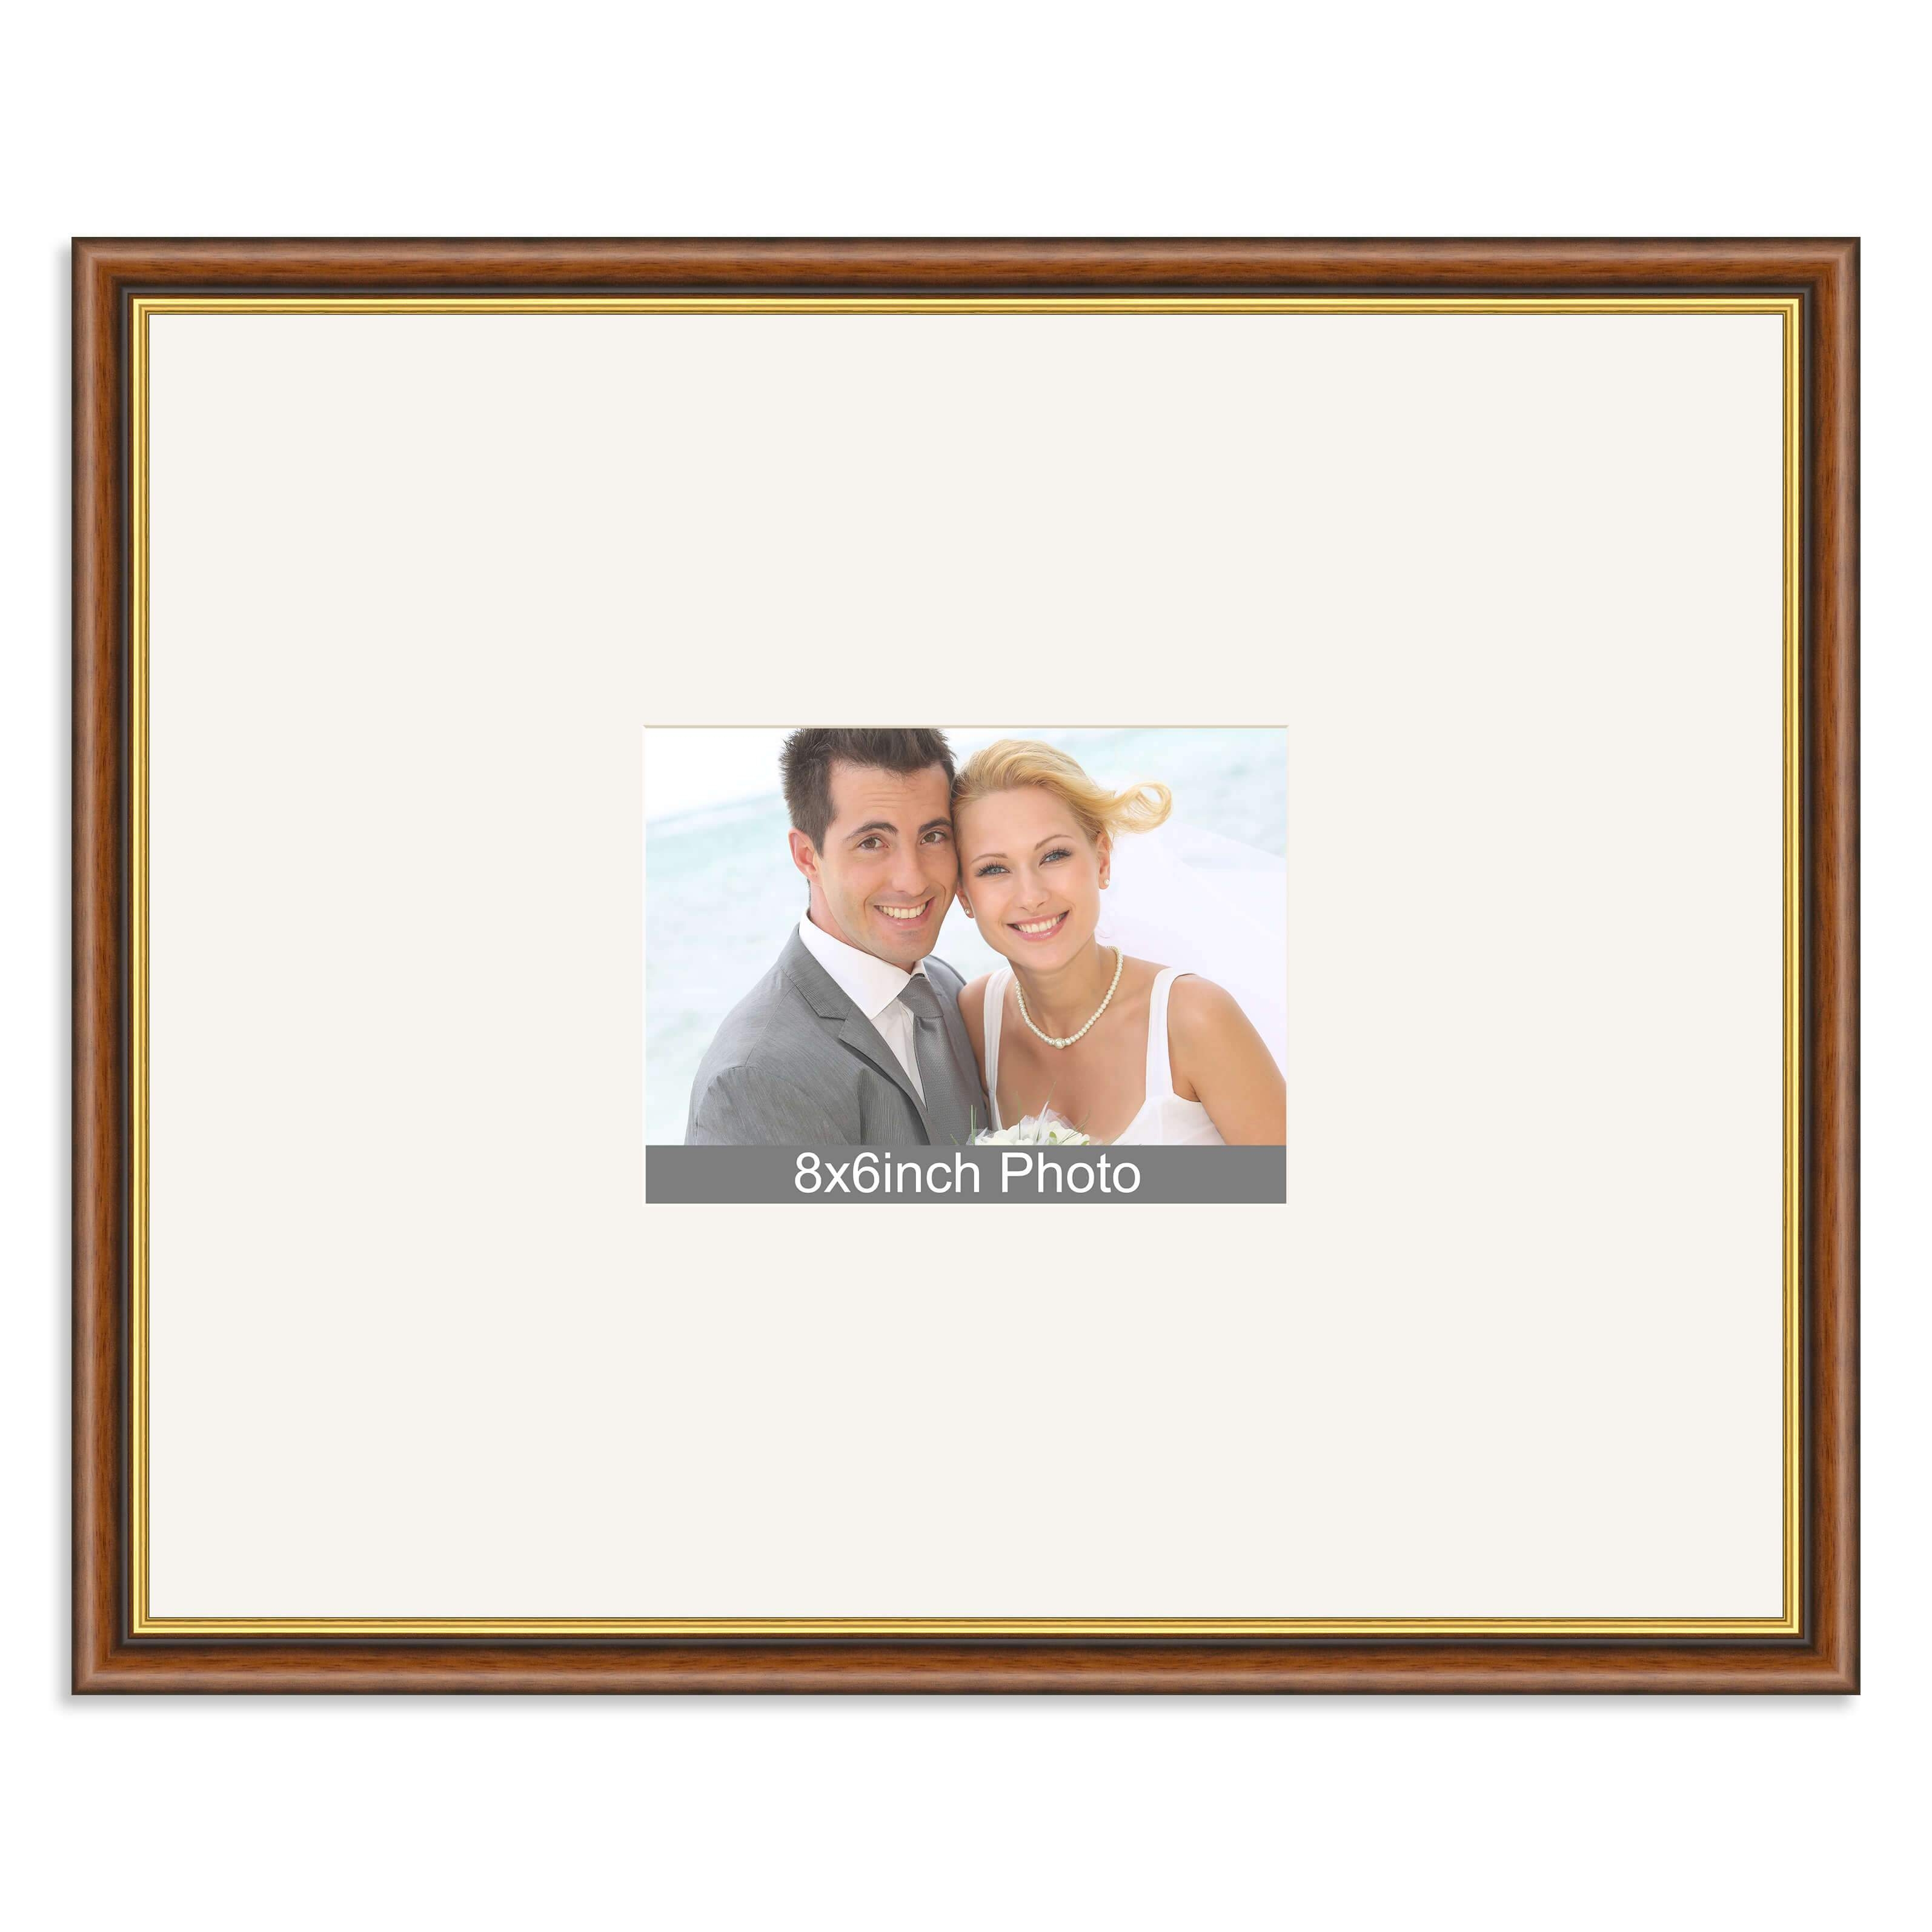 Mahogany & Gold Wooden Wedding & Special Occasion Signing Frame for a 8×6/6x8in Photo